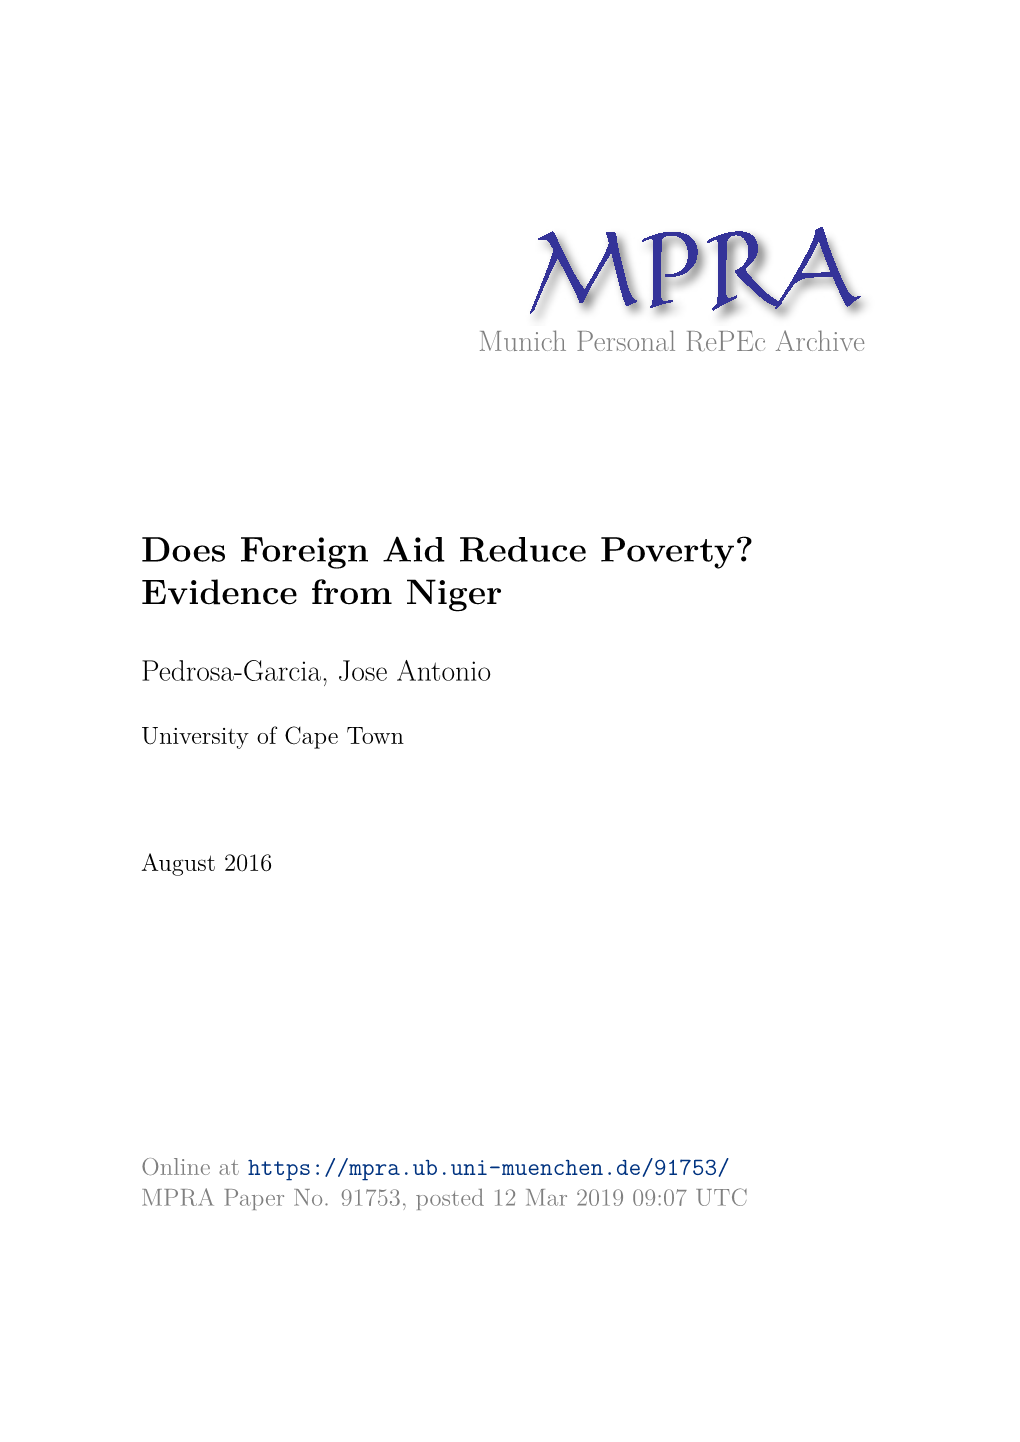 Does Foreign Aid Reduce Poverty? Evidence from Niger